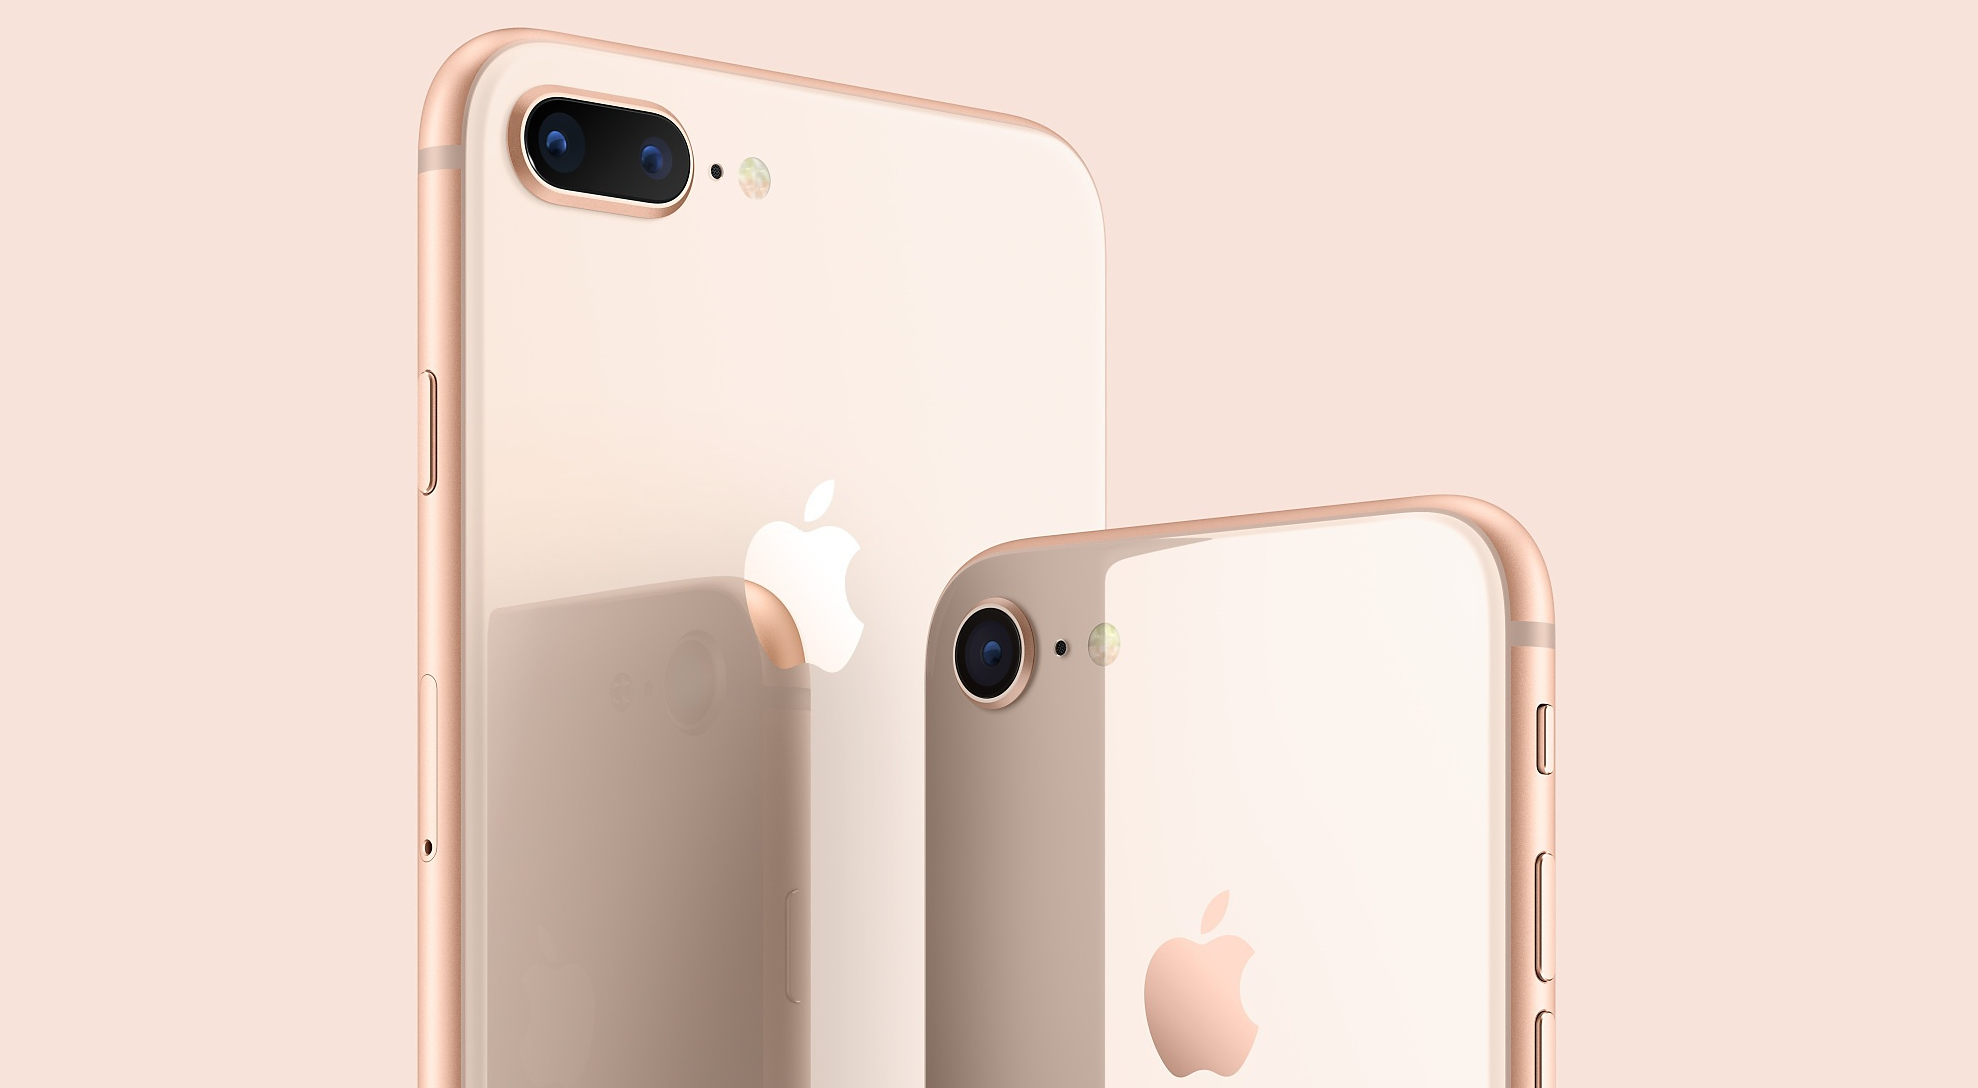 Here's how you can buy the iPhone 8 for half the price TechRadar